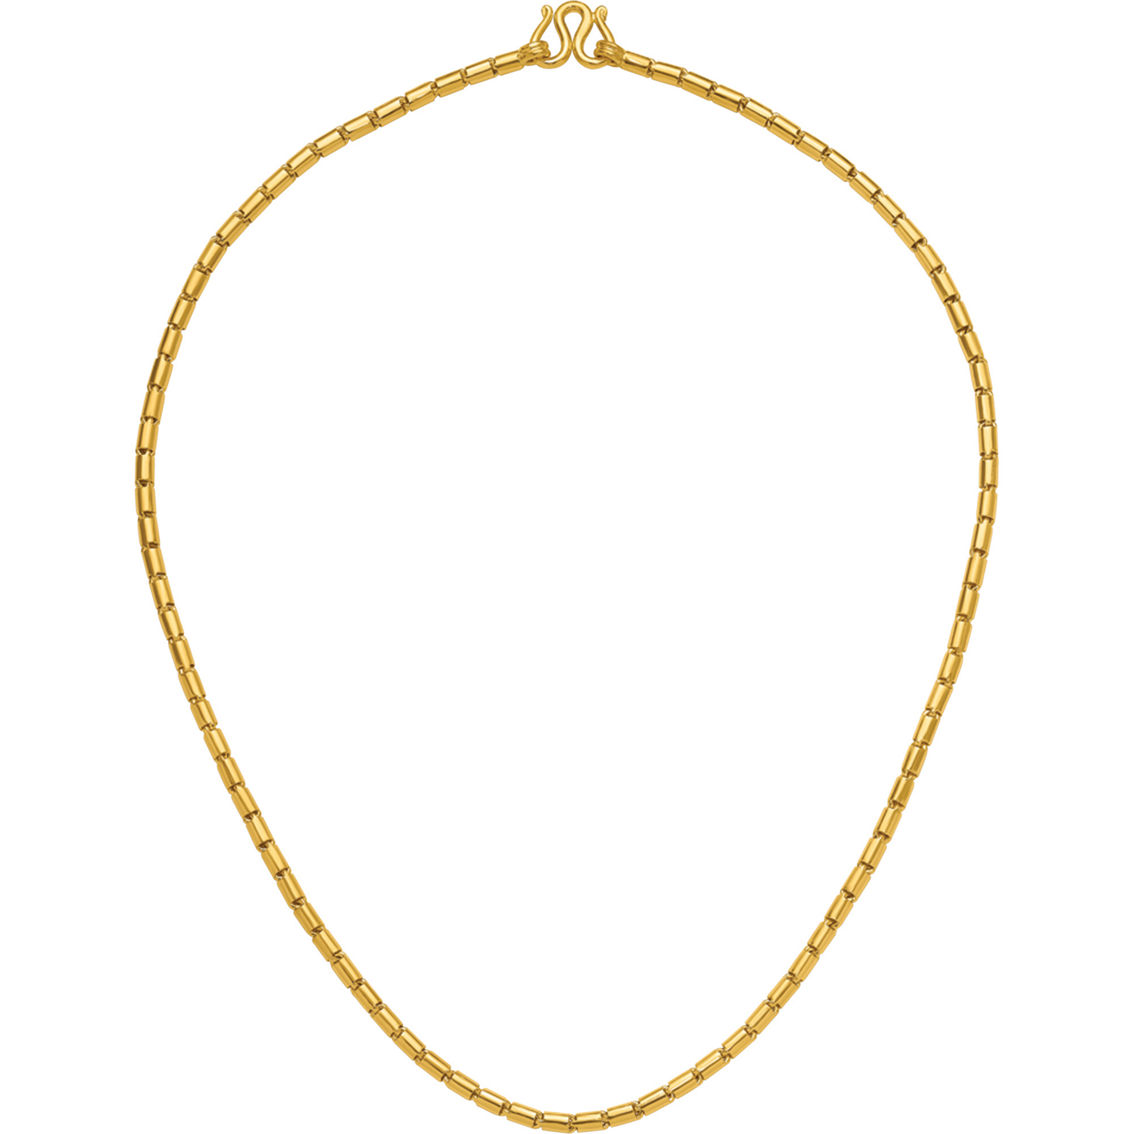 24K Pure Gold 24K Yellow Gold 4.3mm Solid Large Round Barrel Link 18 in. Chain - Image 3 of 5